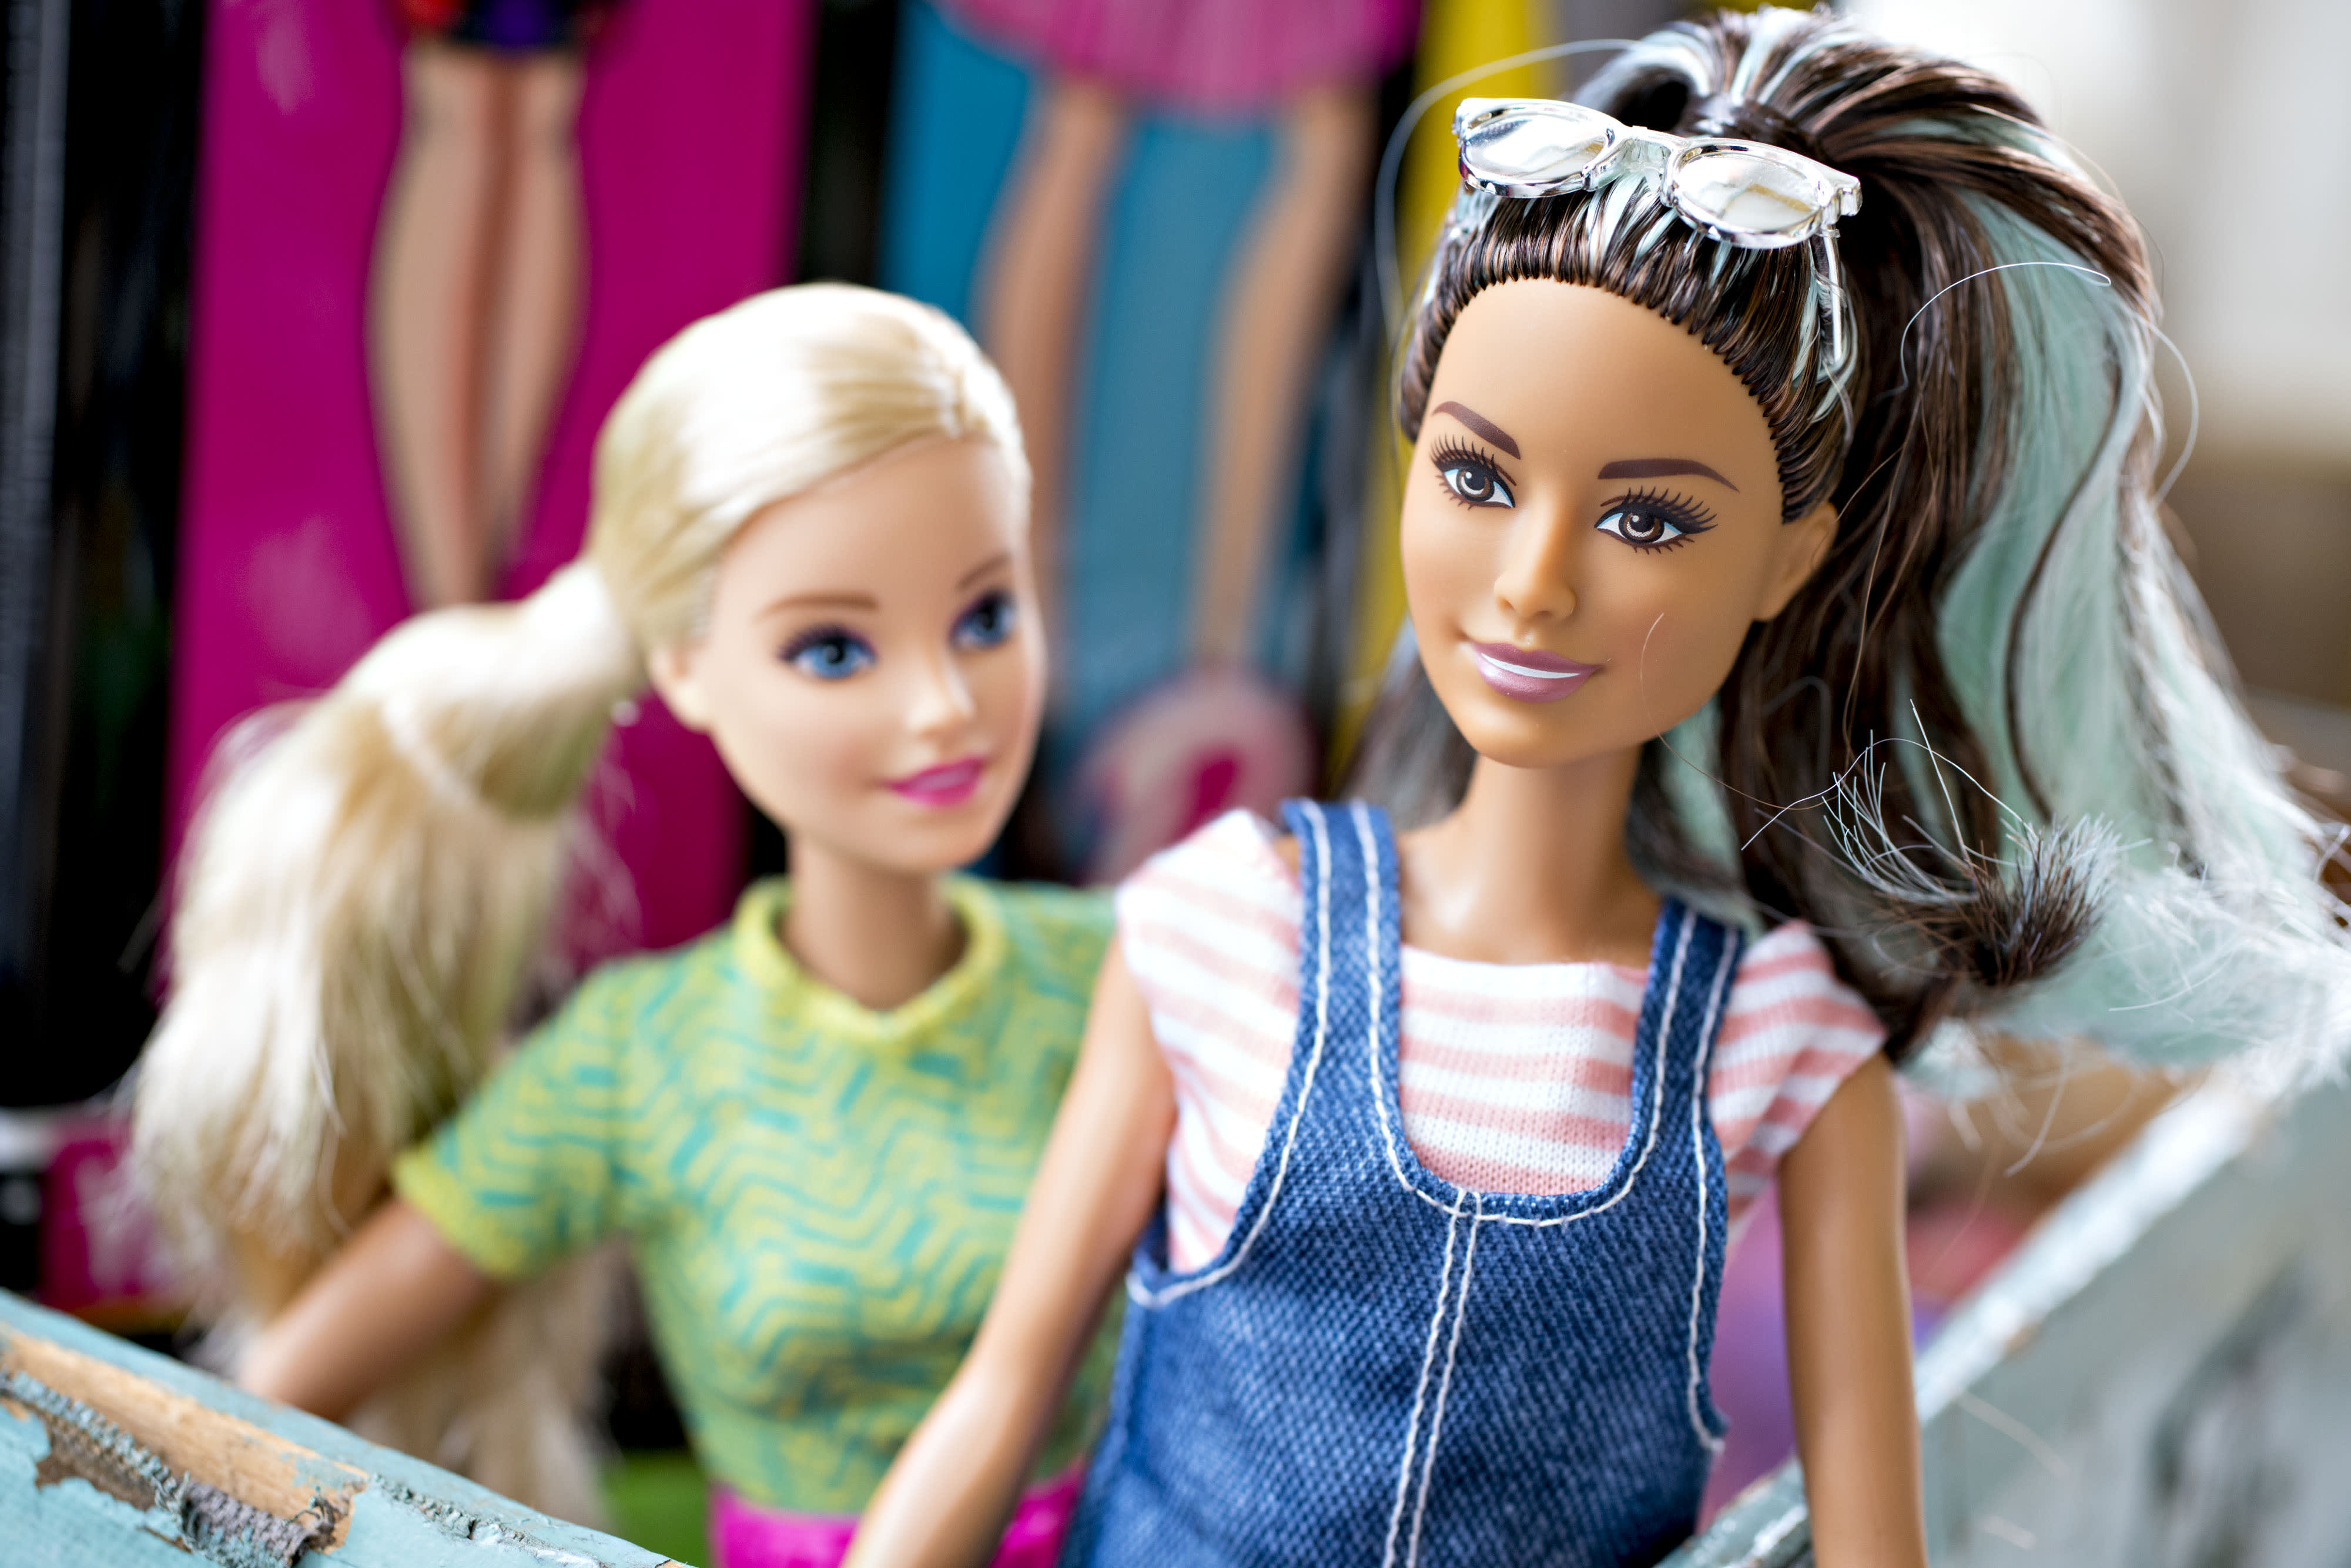 Mattel unveils its strategy for its next leg of growth